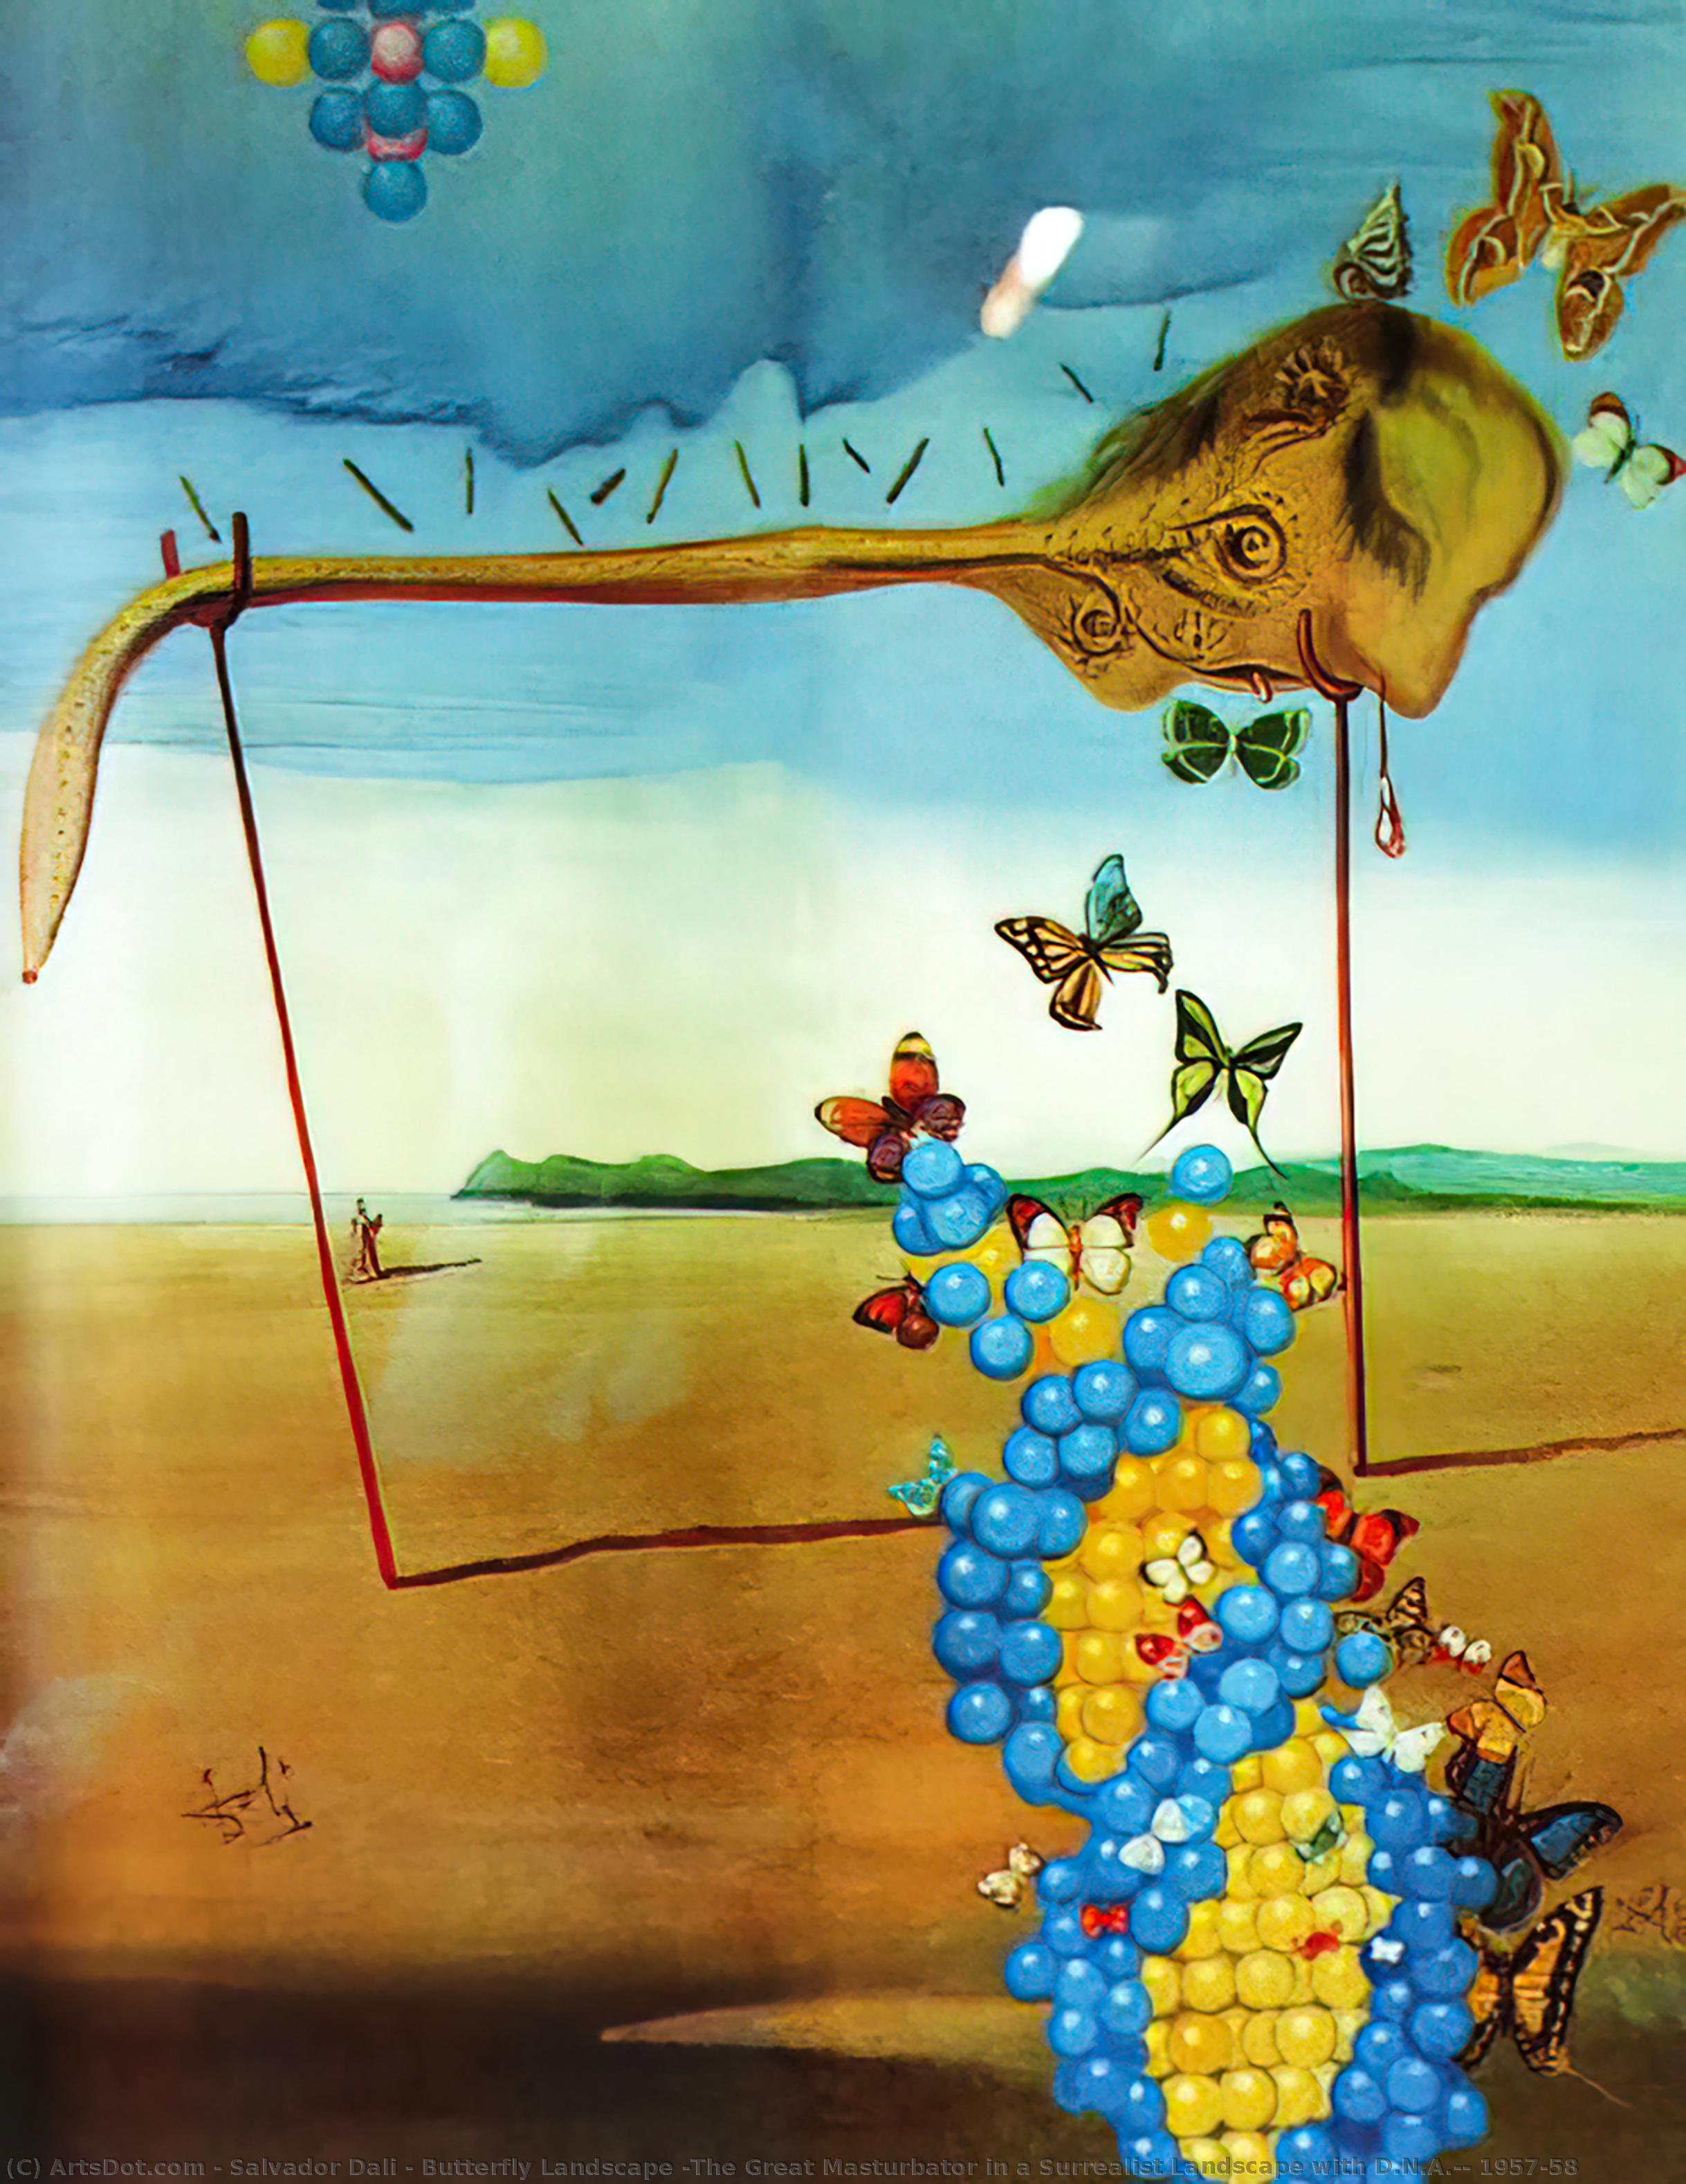 WikiOO.org - 백과 사전 - 회화, 삽화 Salvador Dali - Butterfly Landscape (The Great Masturbator in a Surrealist Landscape with D.N.A.), 1957-58